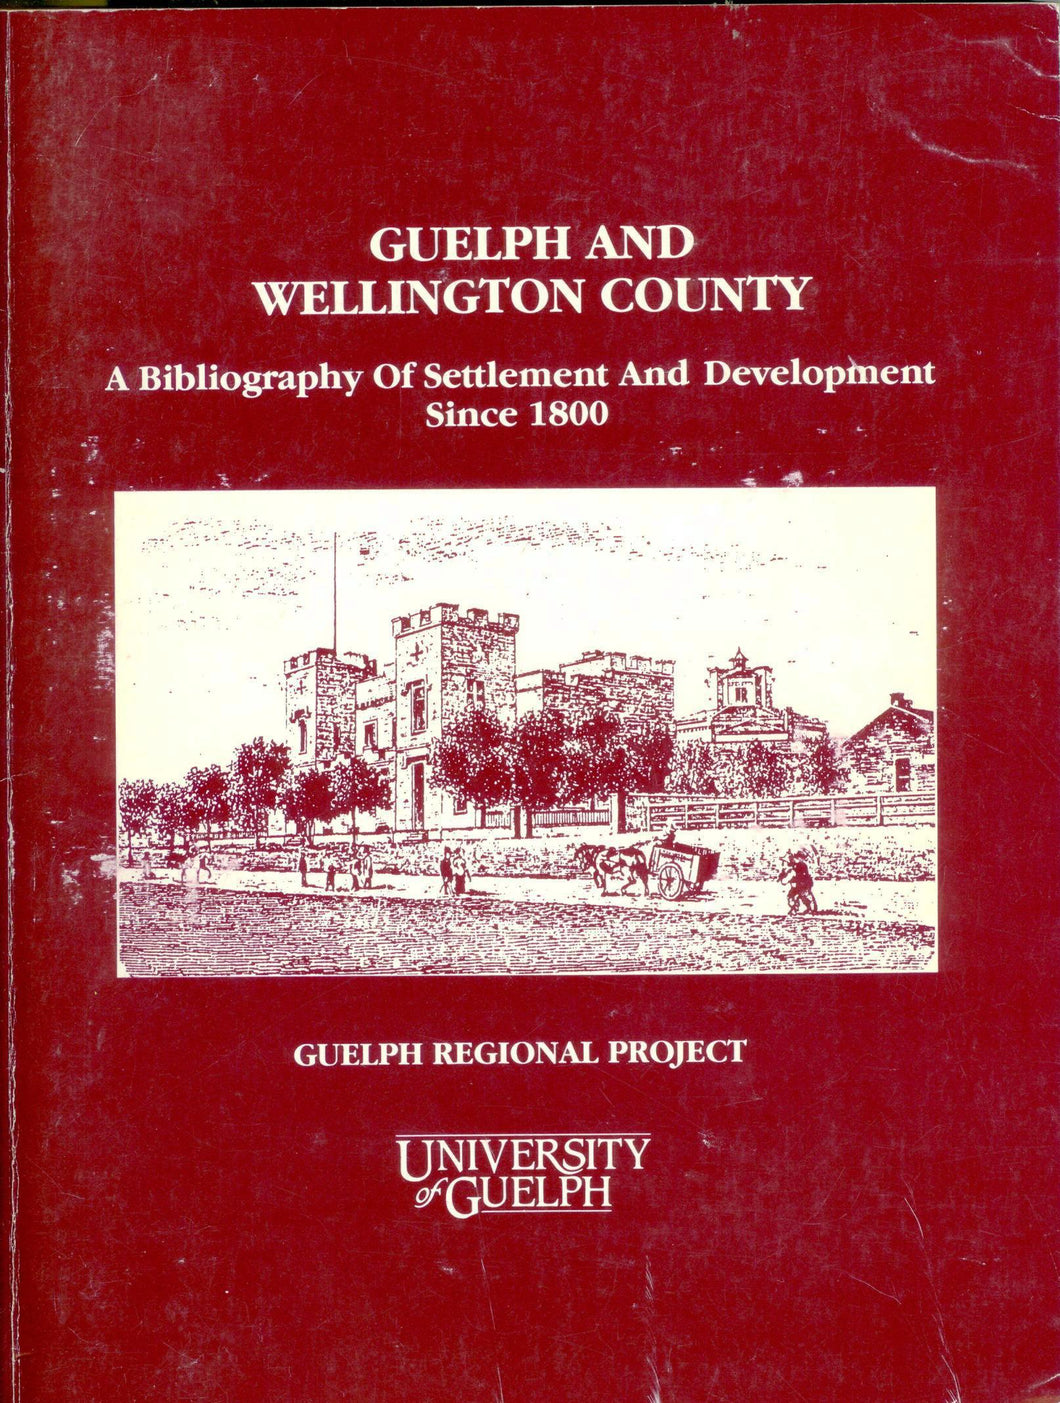 Guelph and Wellington County: A Bibliography of Settlement and Development since 1800